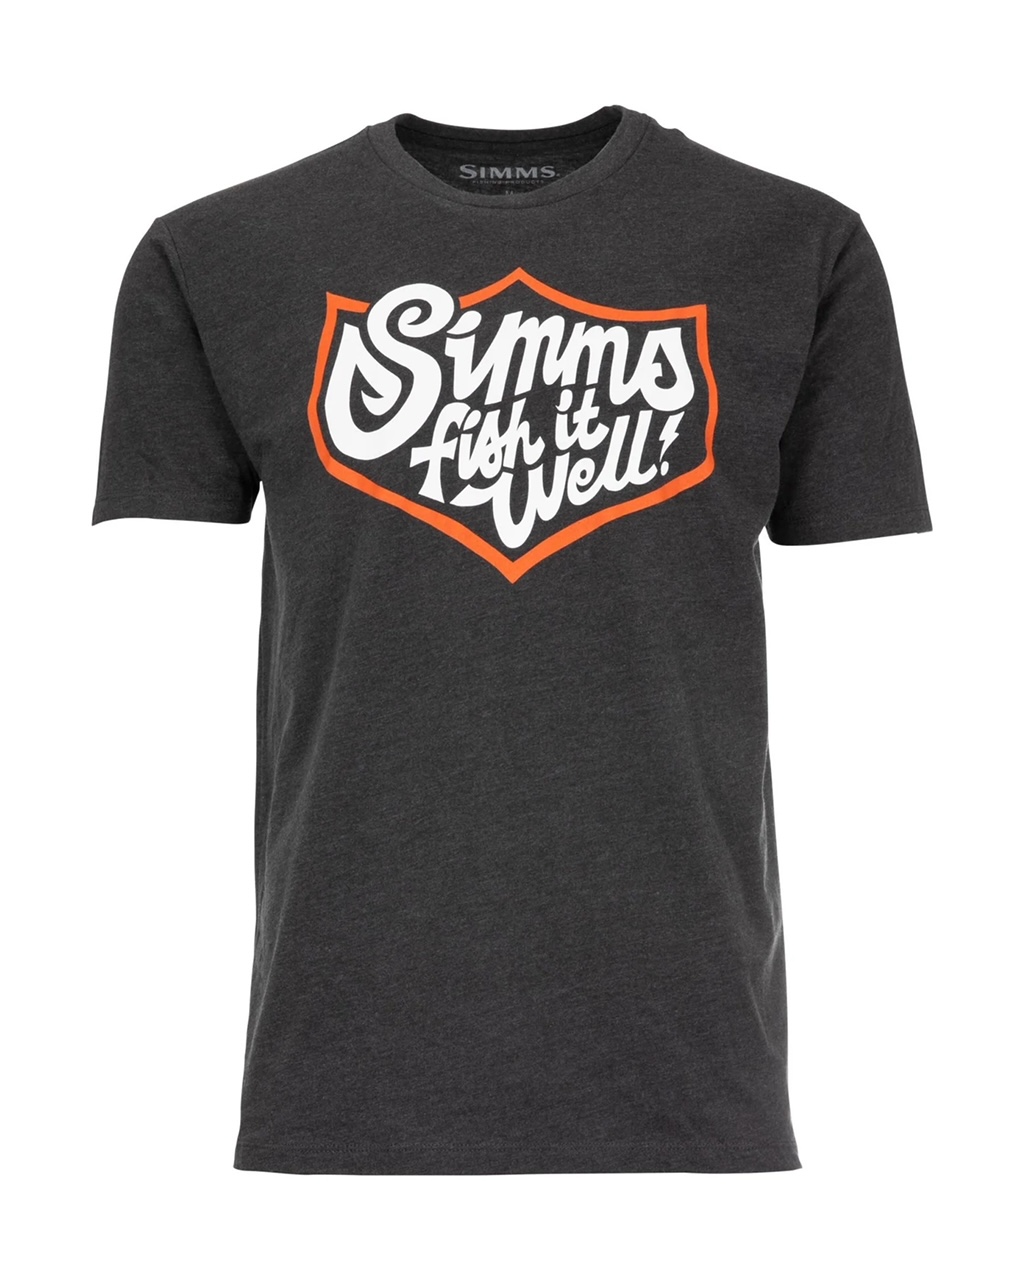 Simms M's Fish It Well Badge T-Shirt - Charcoal Heather - Large